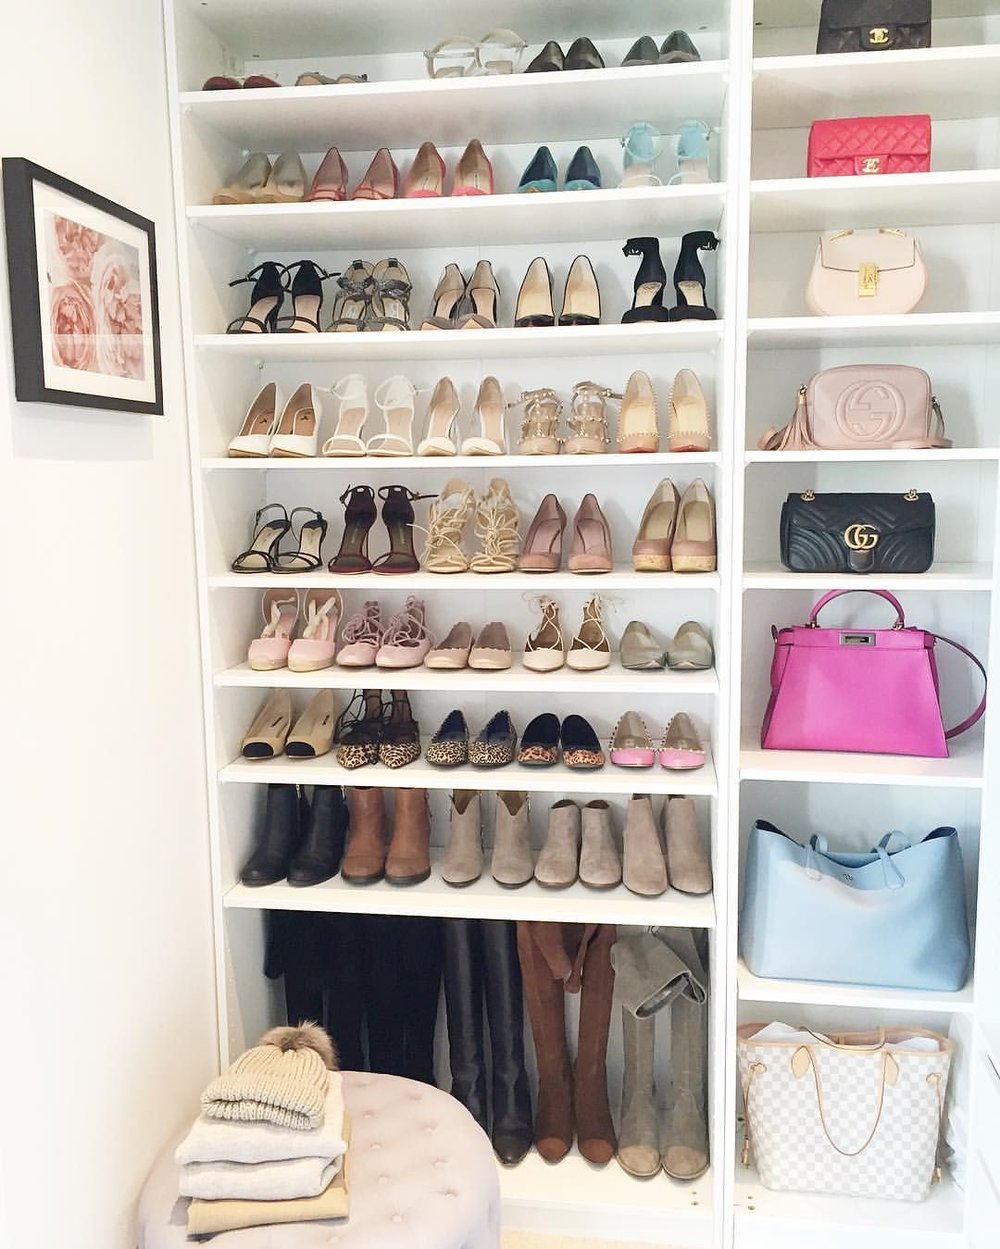 shelves-shoes-closet-wardrobe-storage-how-to-stack-floor-white-boots.jpg